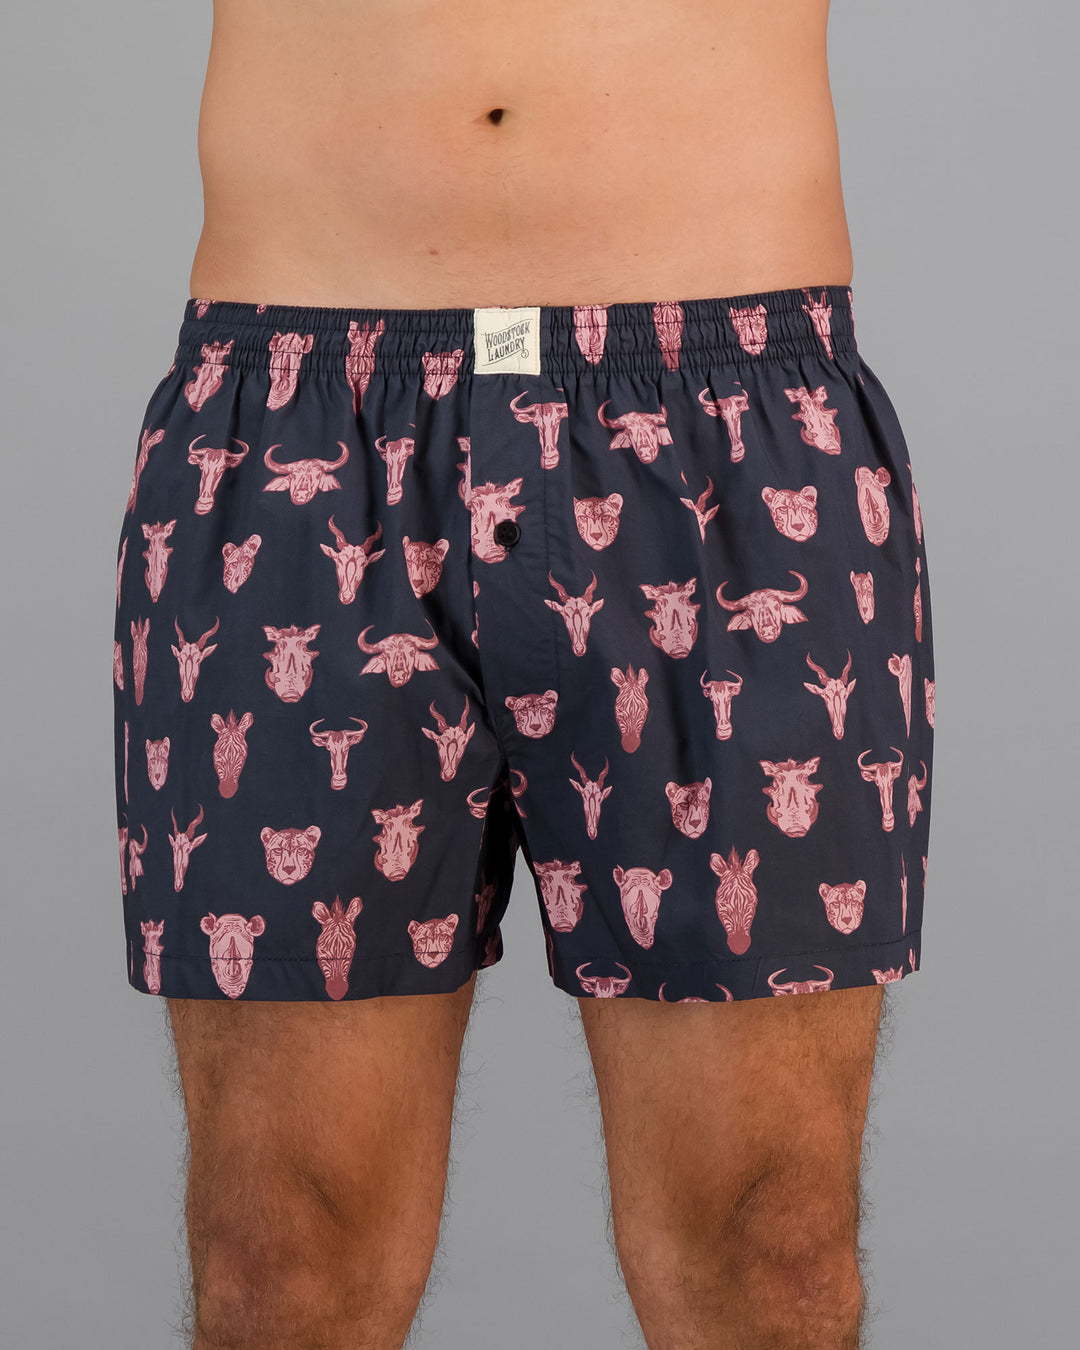 Mens Boxer Shorts Animal Heads Charcoal Front - Woodstock Laundry